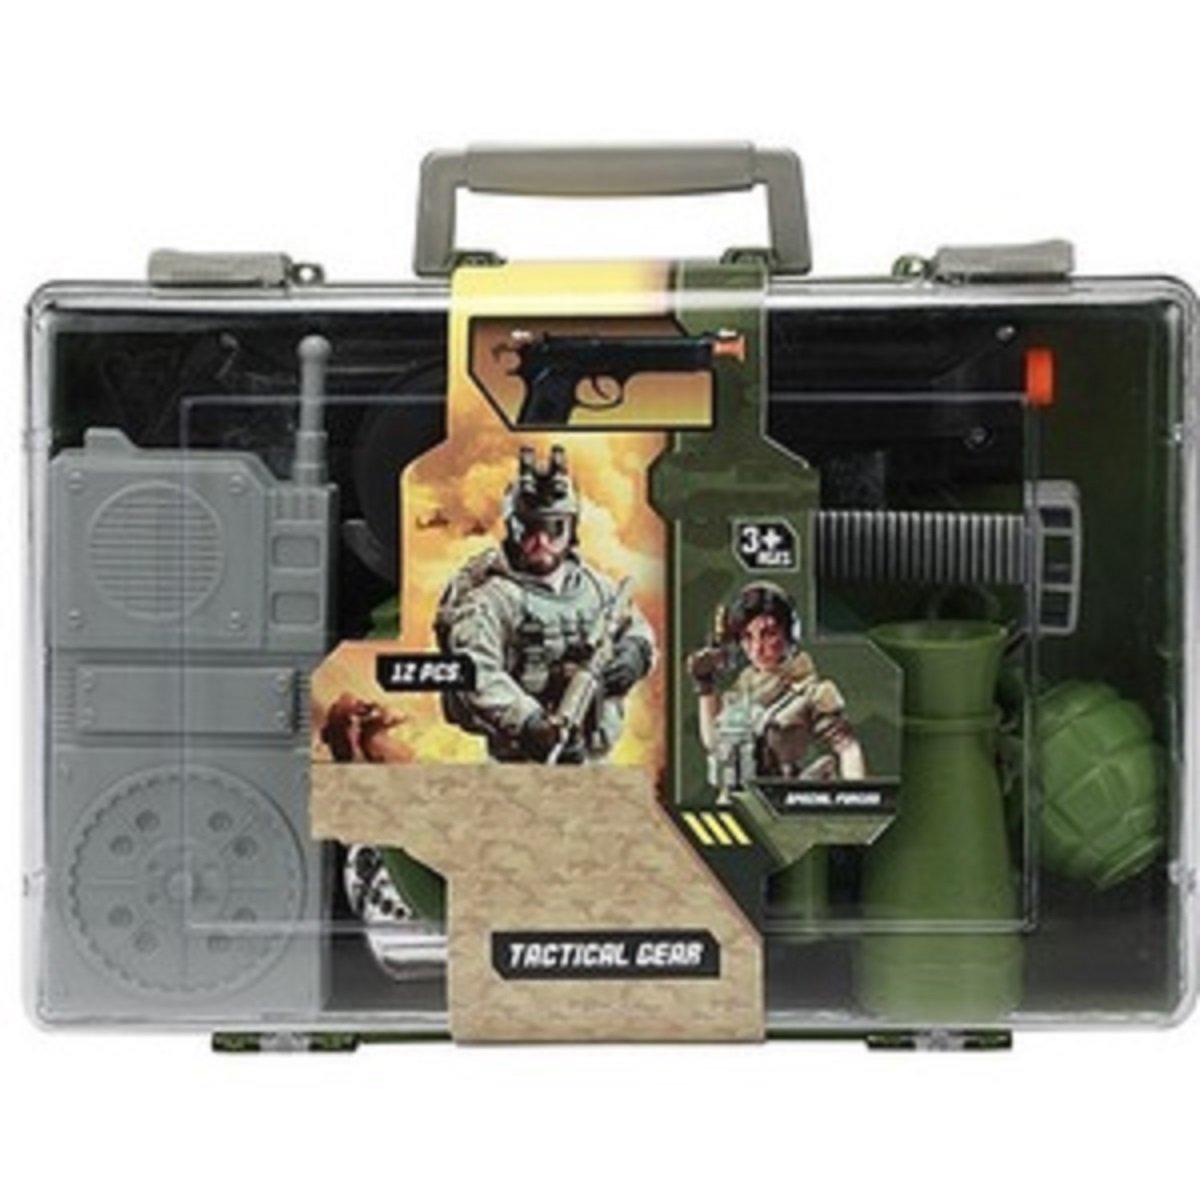 Toy Army Pistol and Gear Playset Military Toy Gun